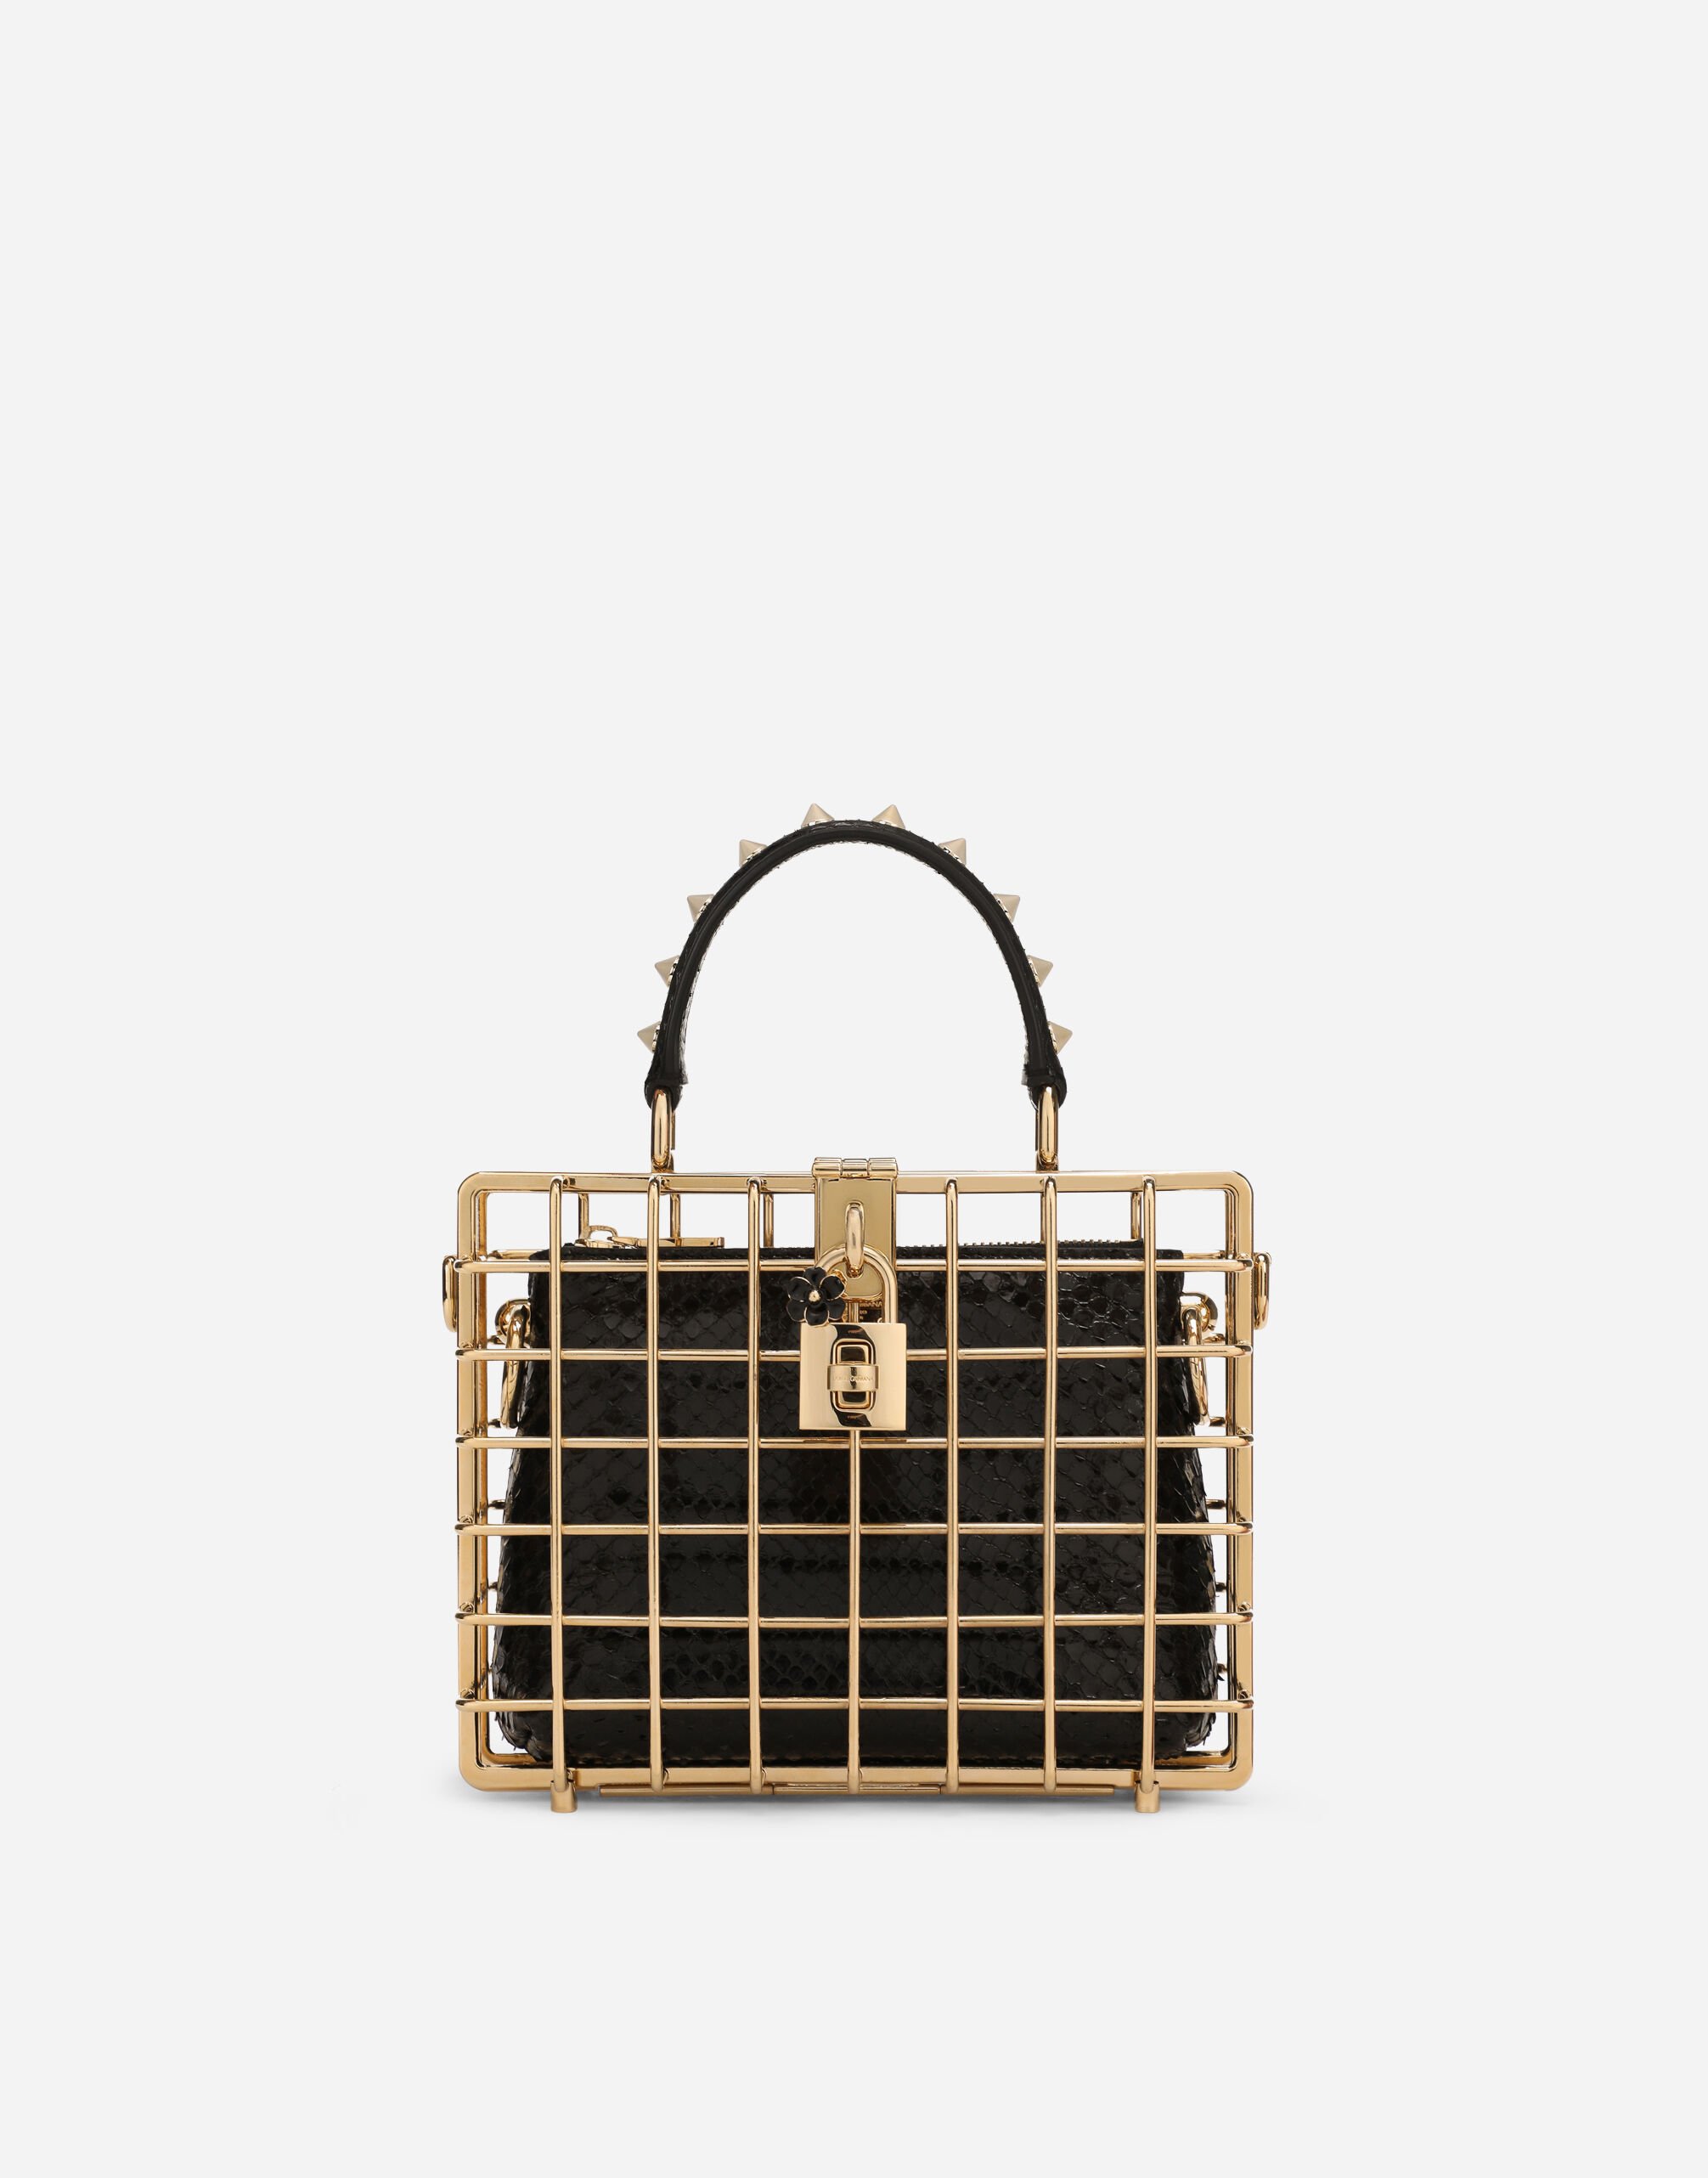 Dolce&Gabbana Dolce Box bag in metal and ayers Gold BB7567AY828